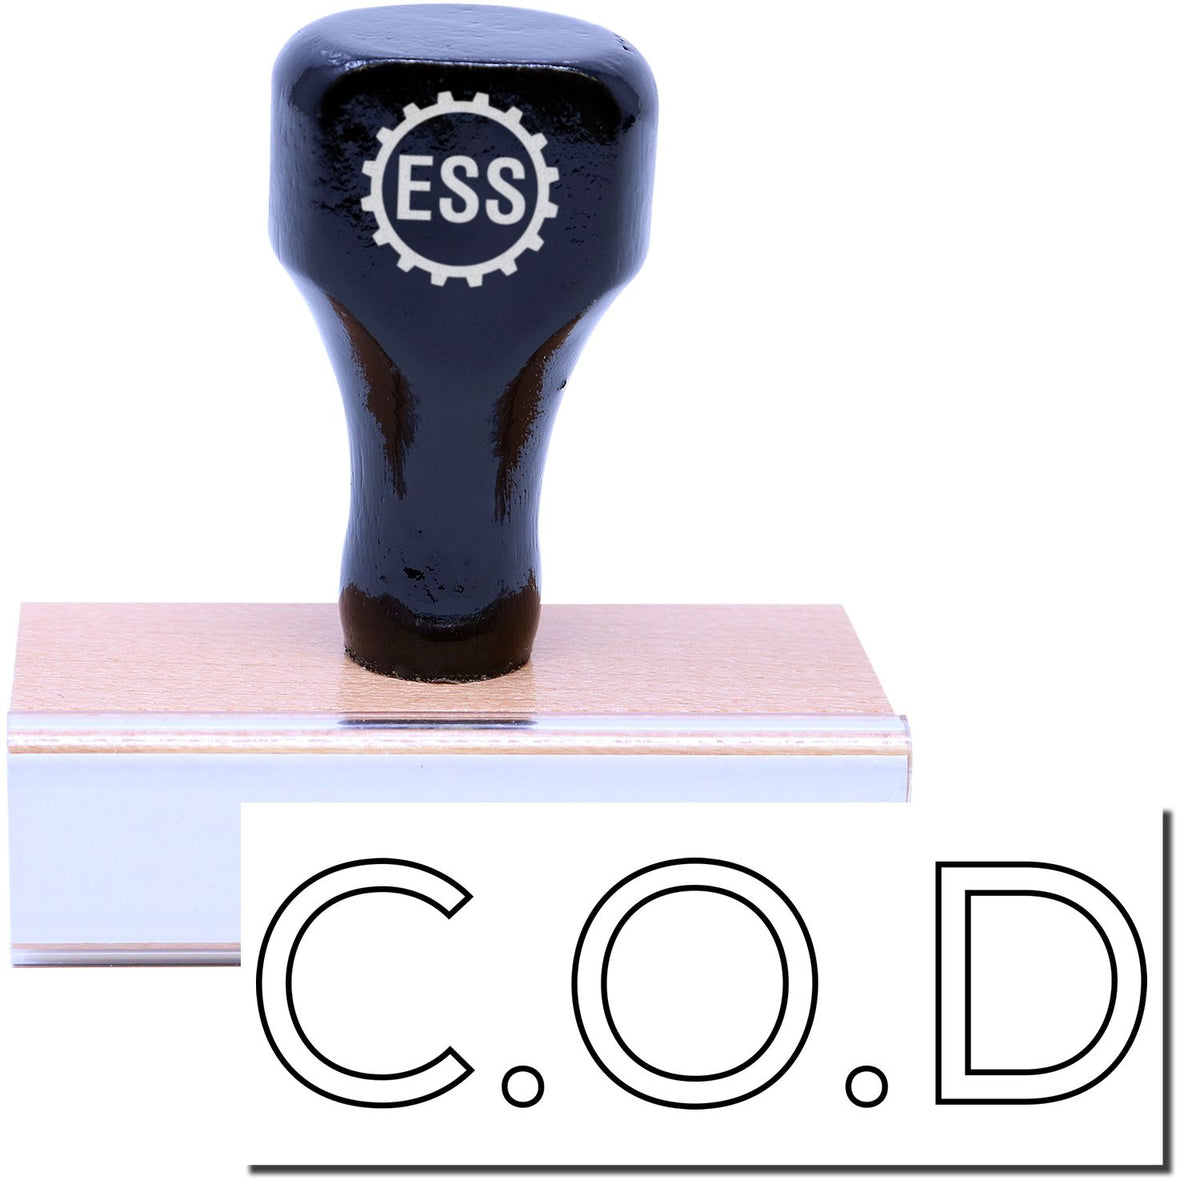 A stock office rubber stamp with a stamped image showing how the text &quot;C.O.D&quot; in a large outline font is displayed after stamping.